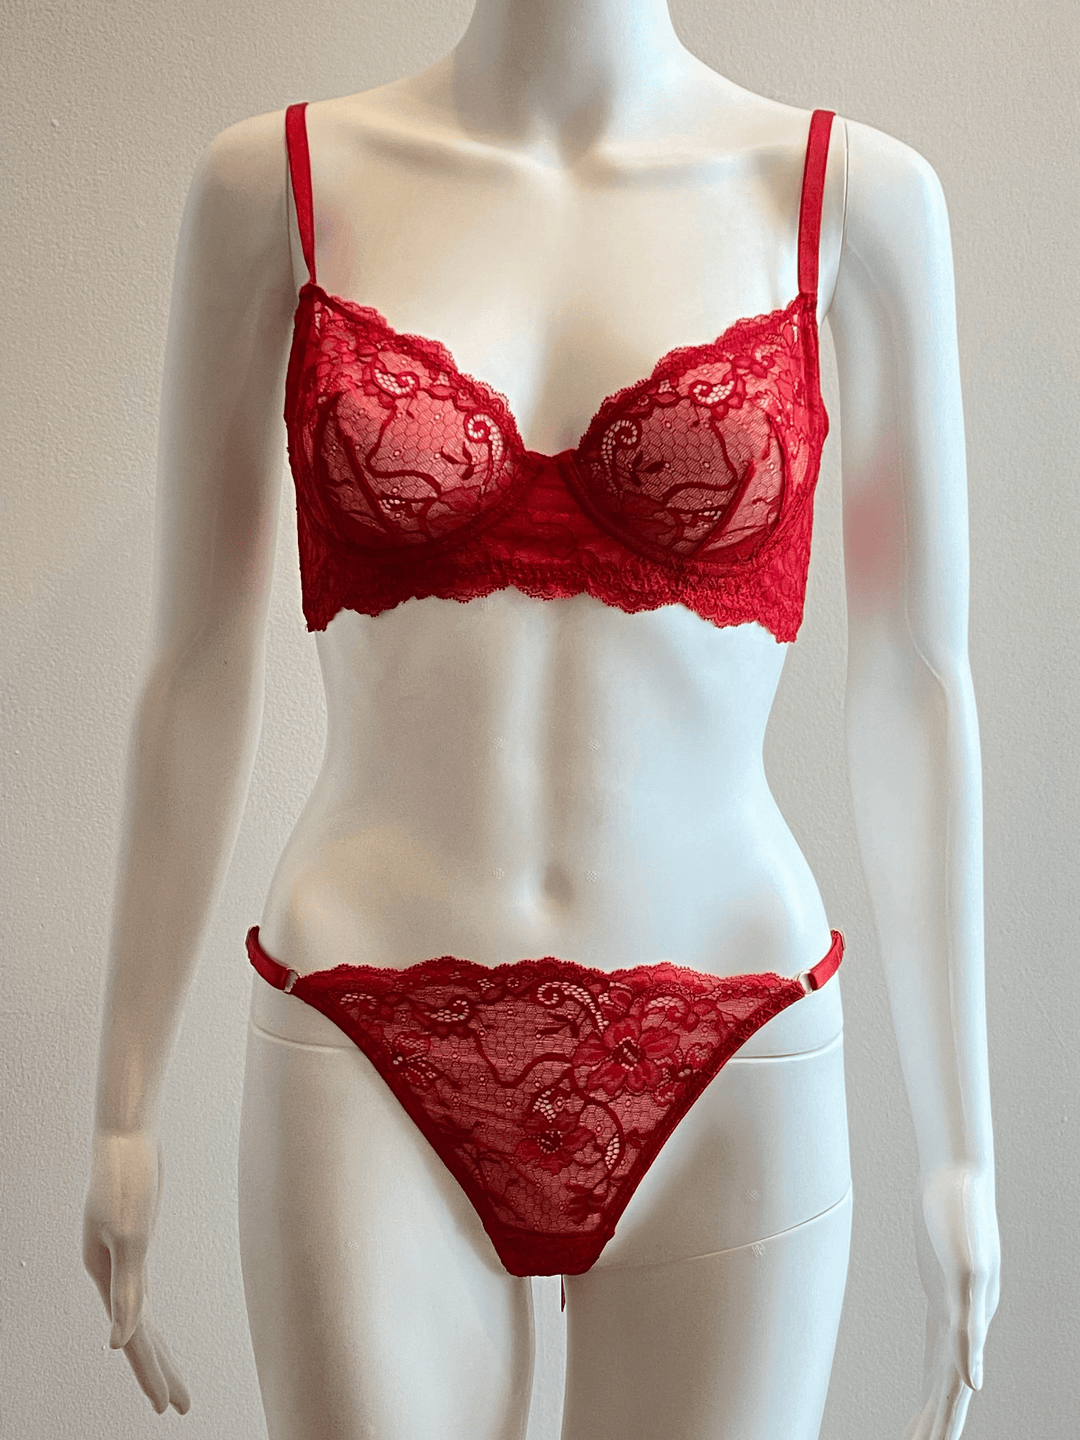 Mvr 300/- ❌Sold❌ Contrast Lace Underwire Bra Size- L